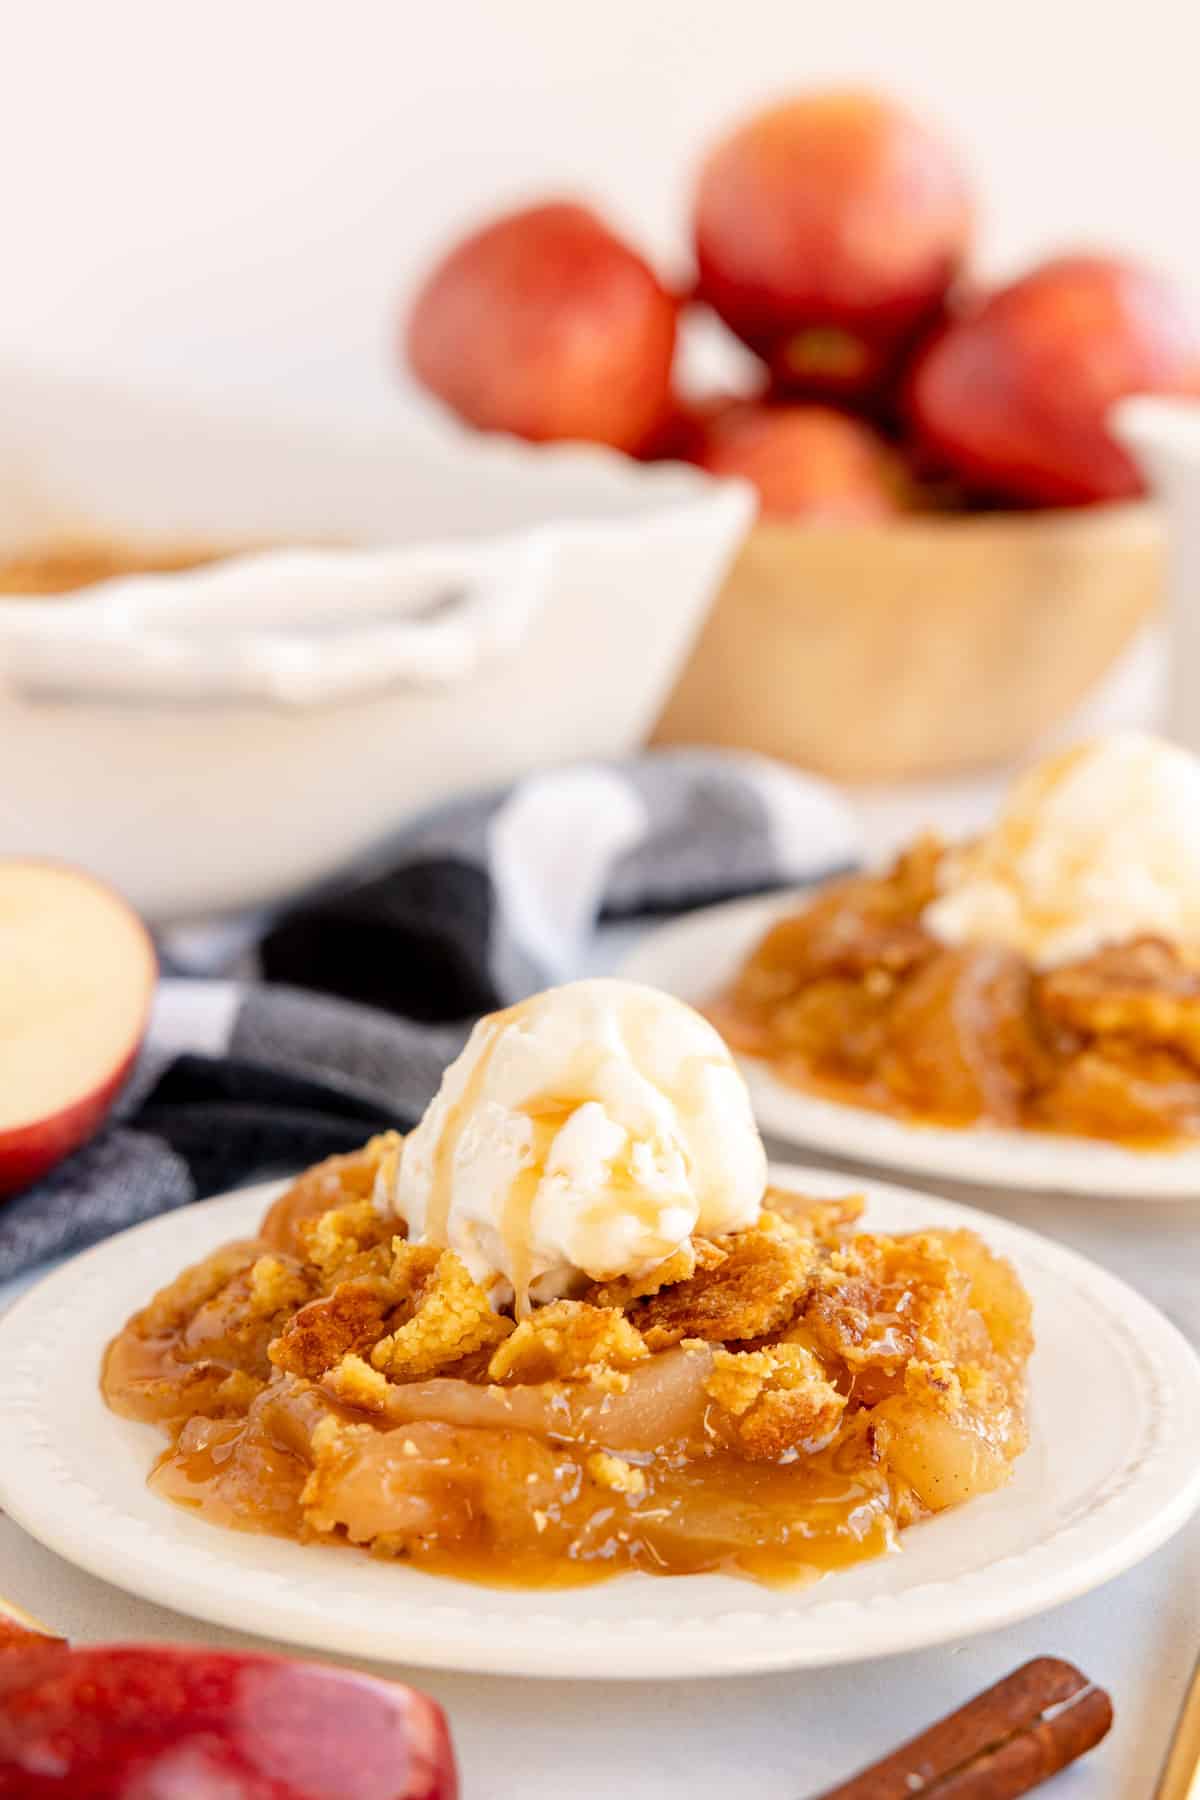 A plate of Apple Dump Cake with ice cream and apples.